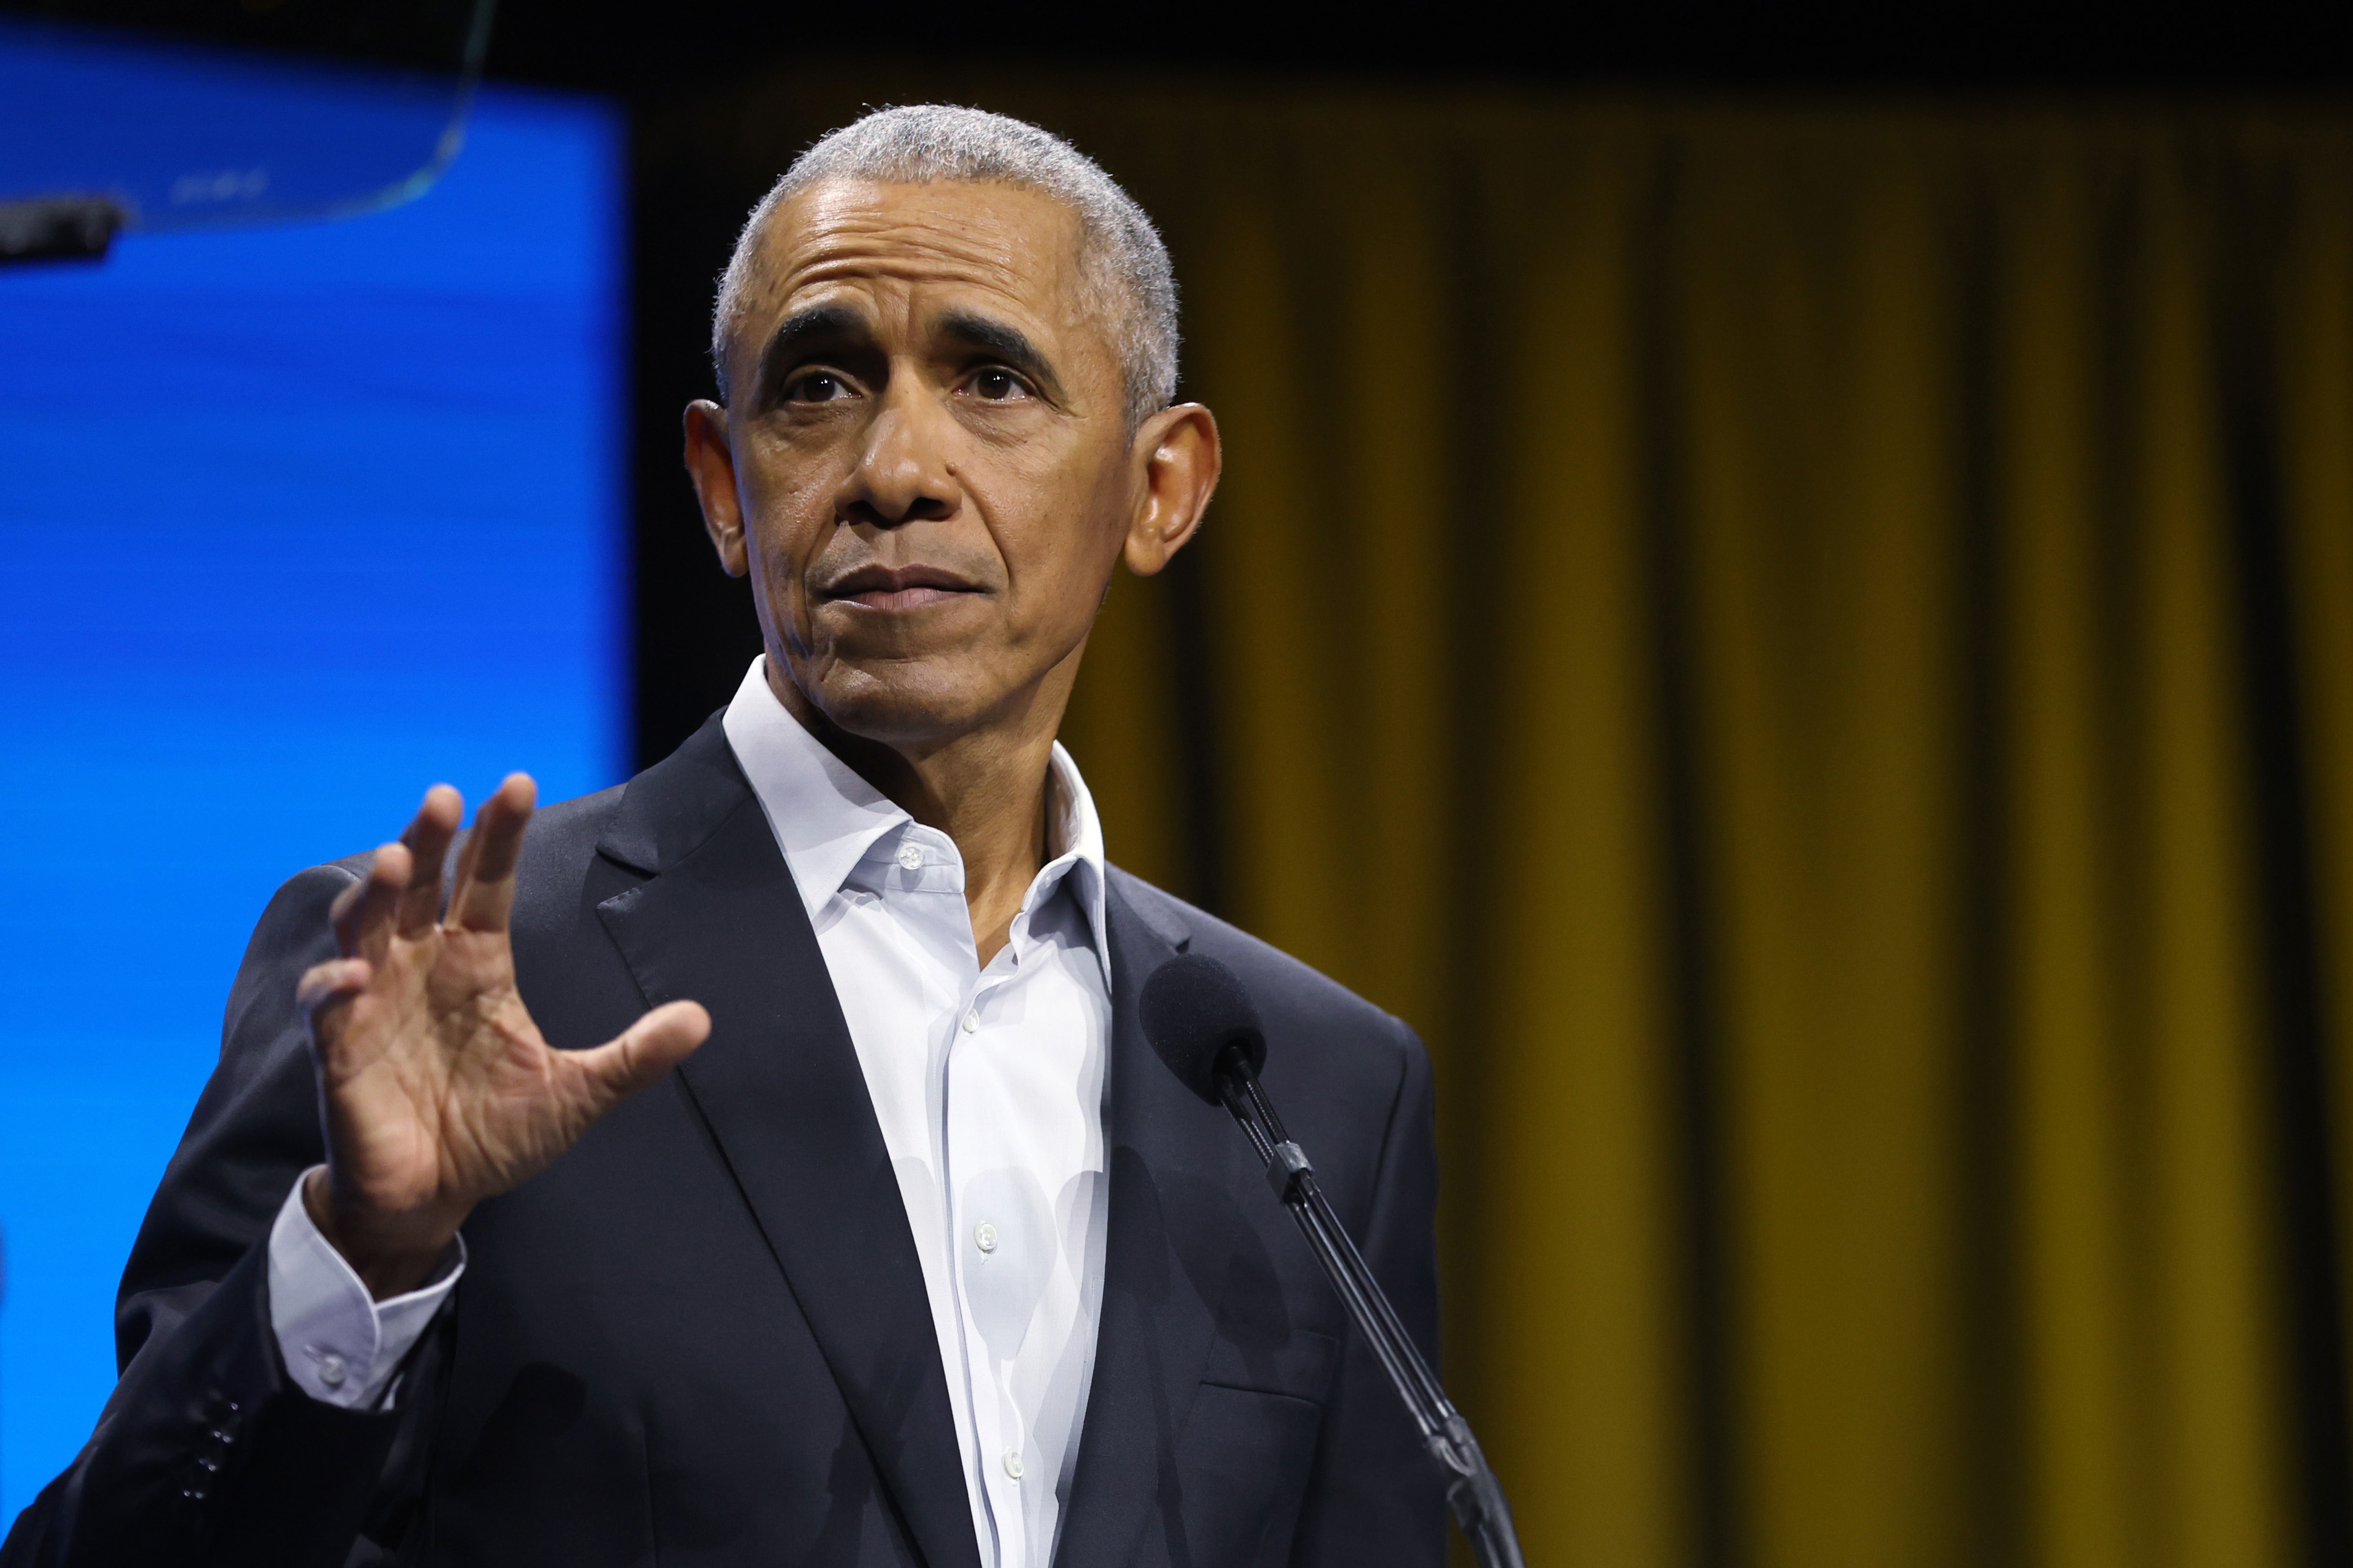 Barack Obama speaking at an event, wearing a suit without a tie, gesturing with his right hand